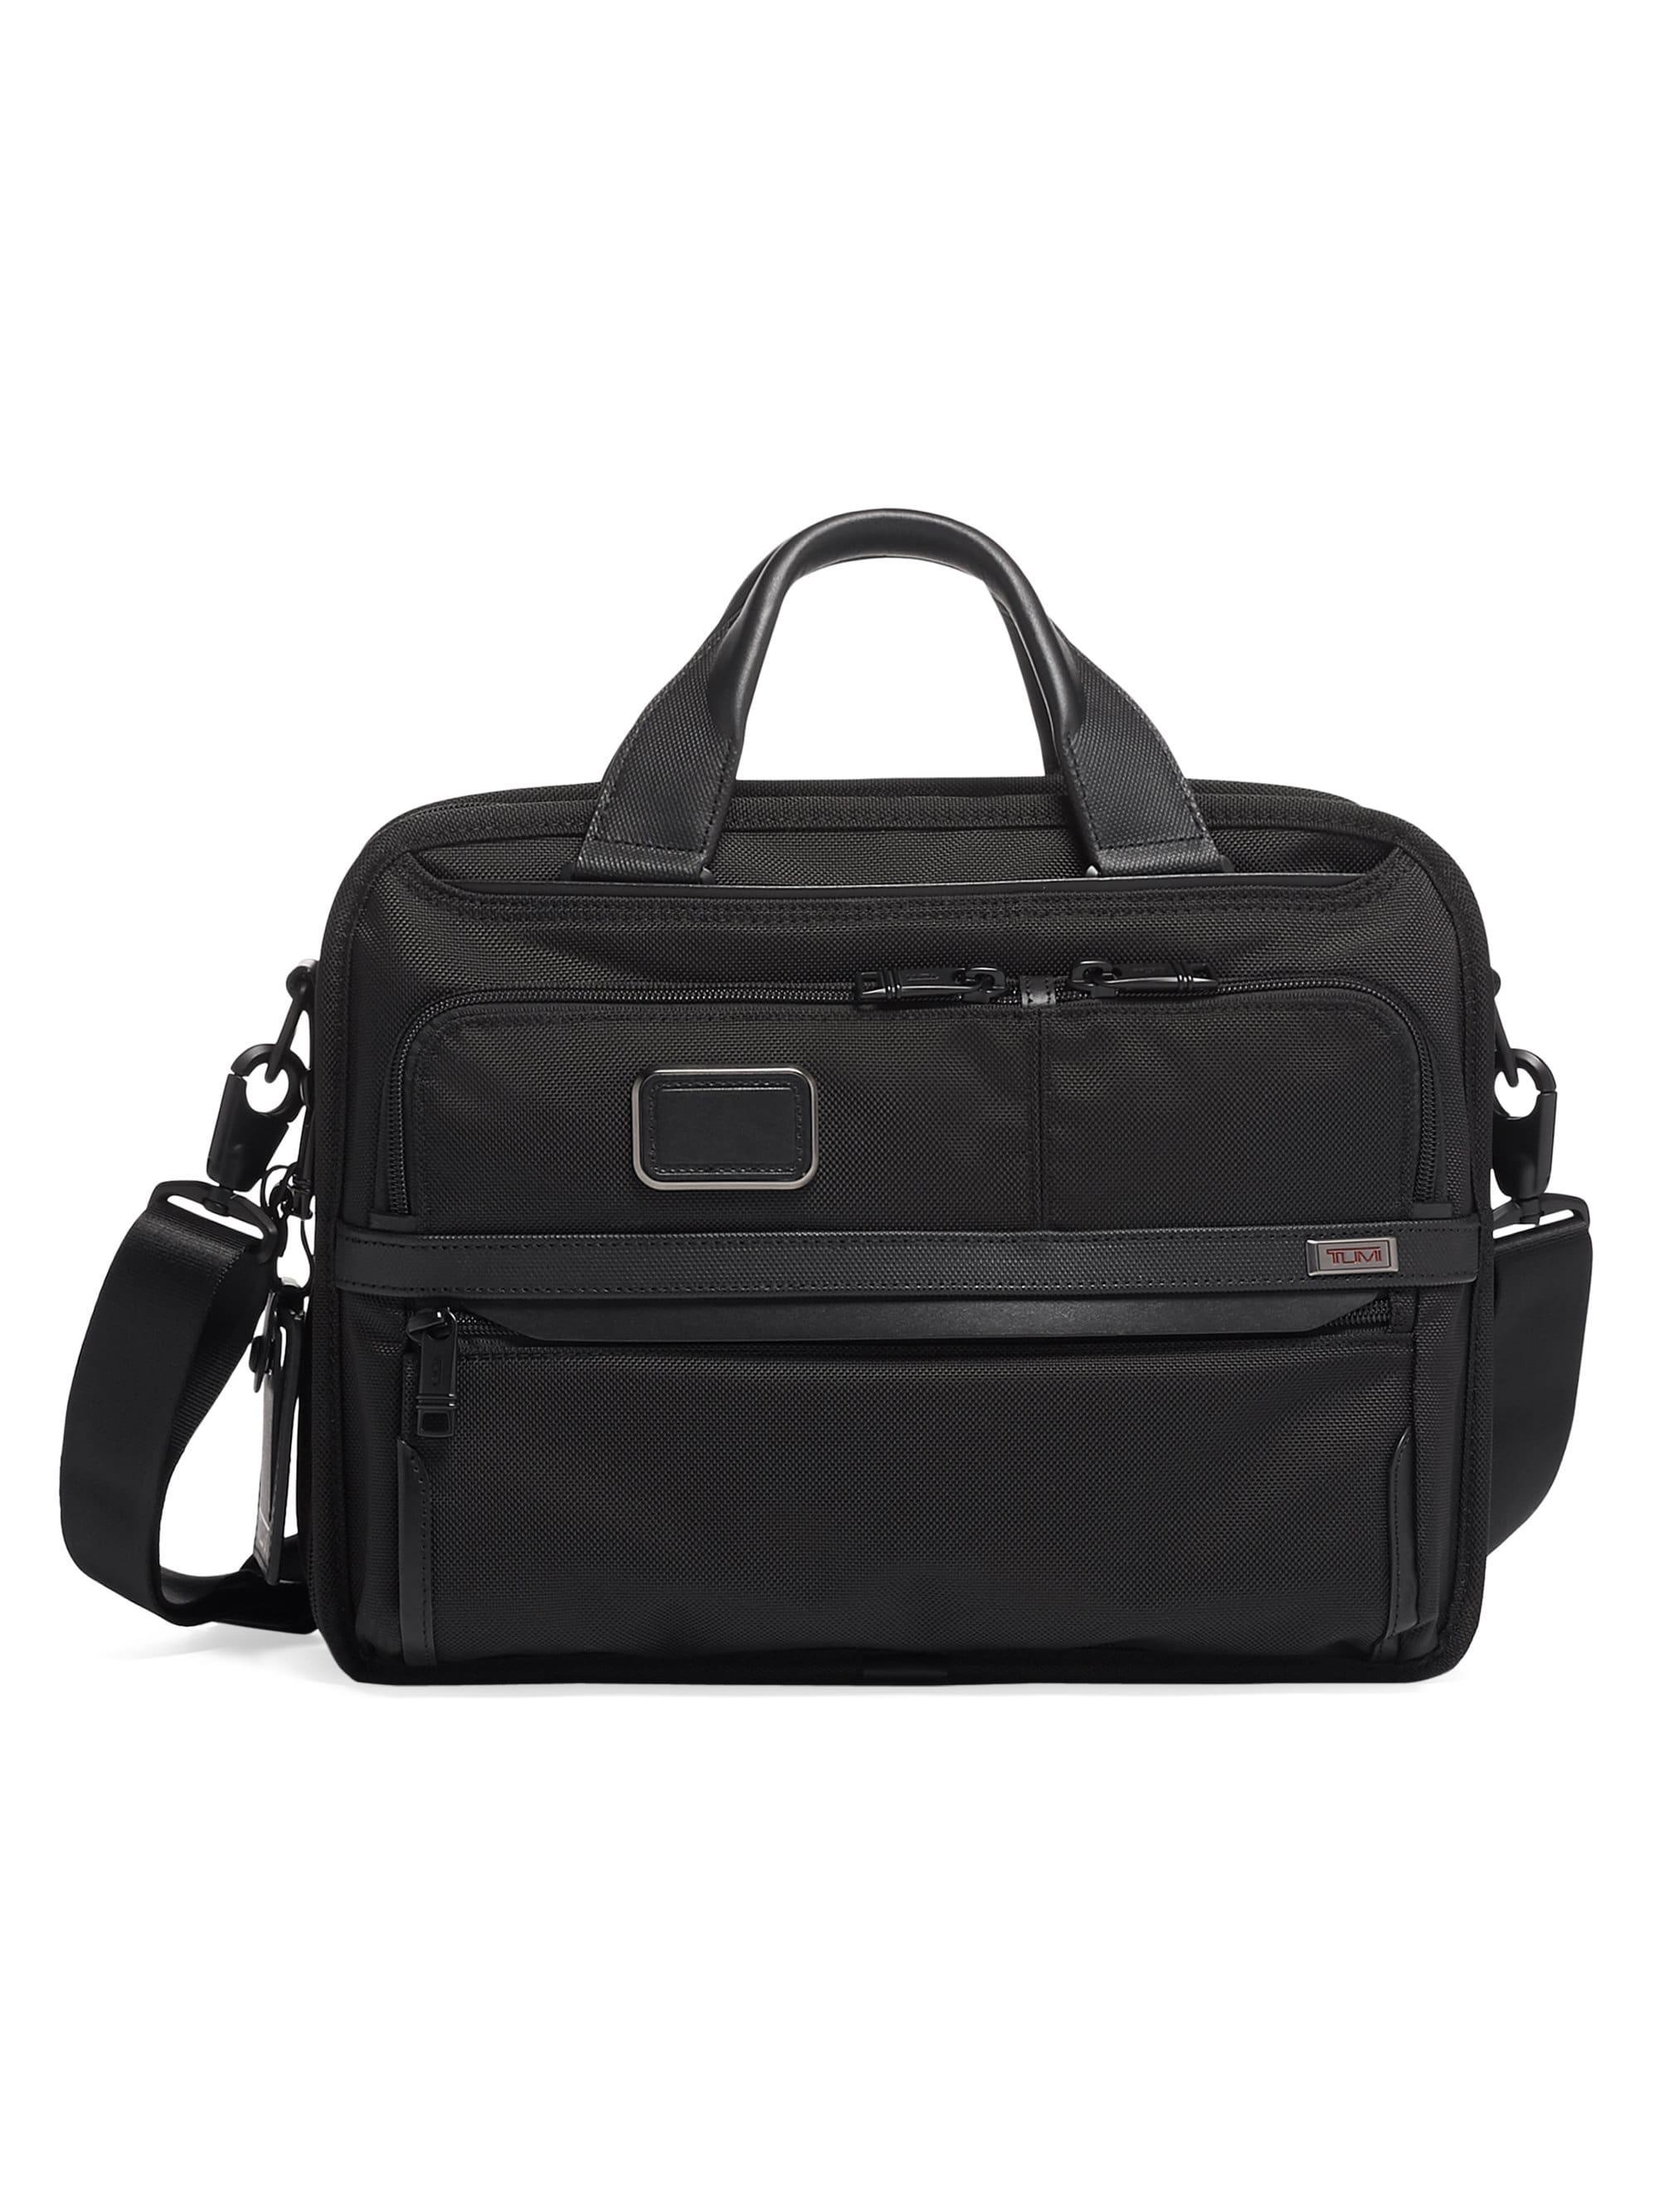 Tumi Alpha Expandable Laptop Briefcase in Black for Men - Lyst